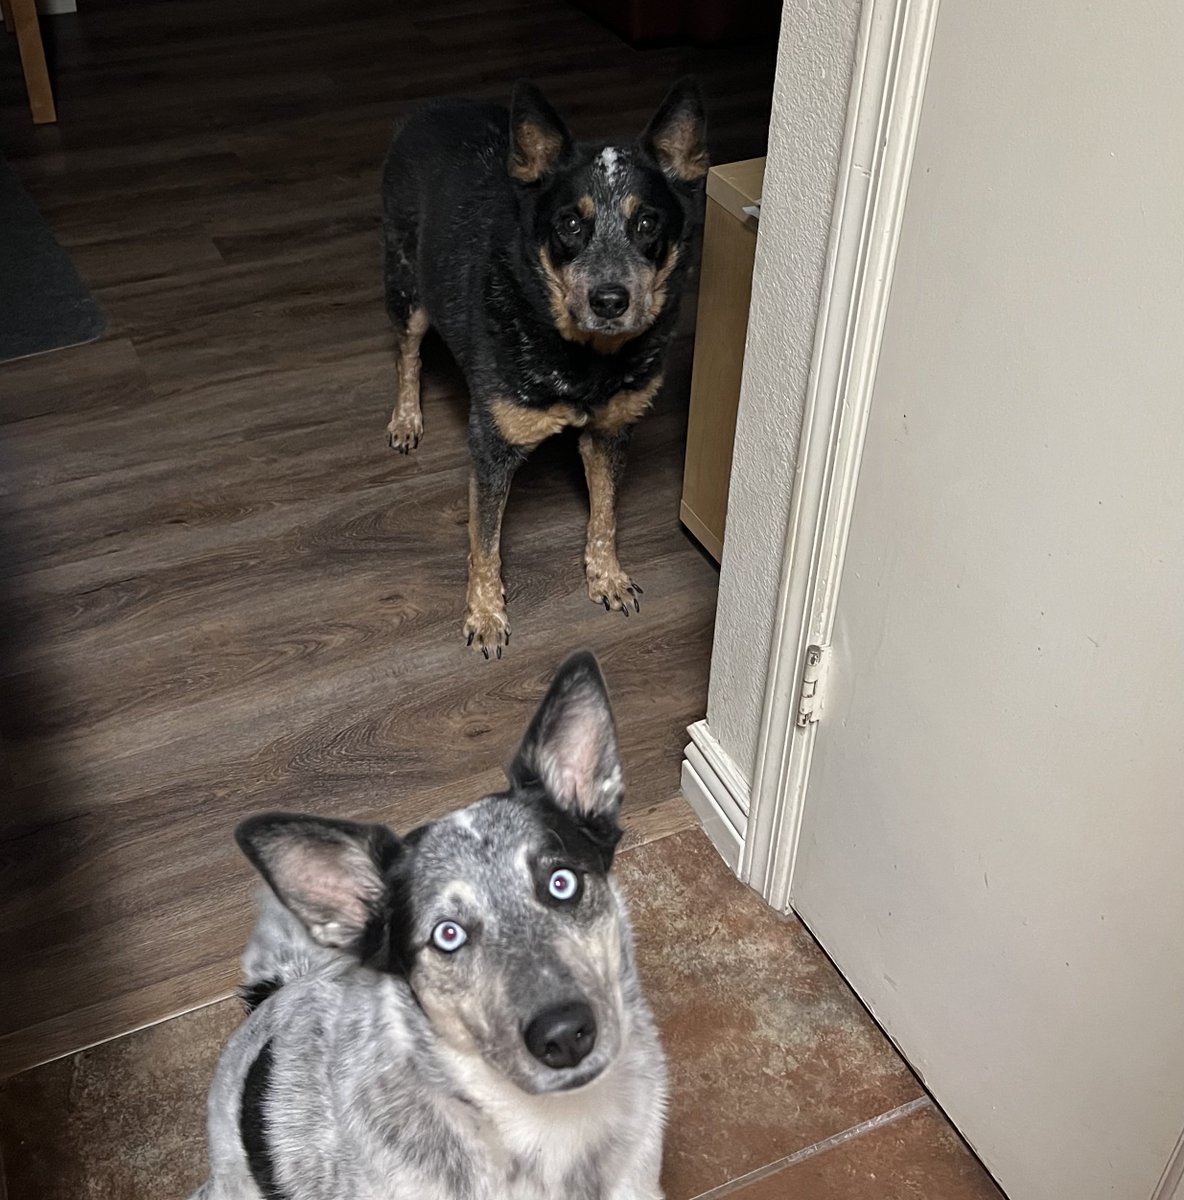 When I stand near the refrigerator. 🤣
#Heelers